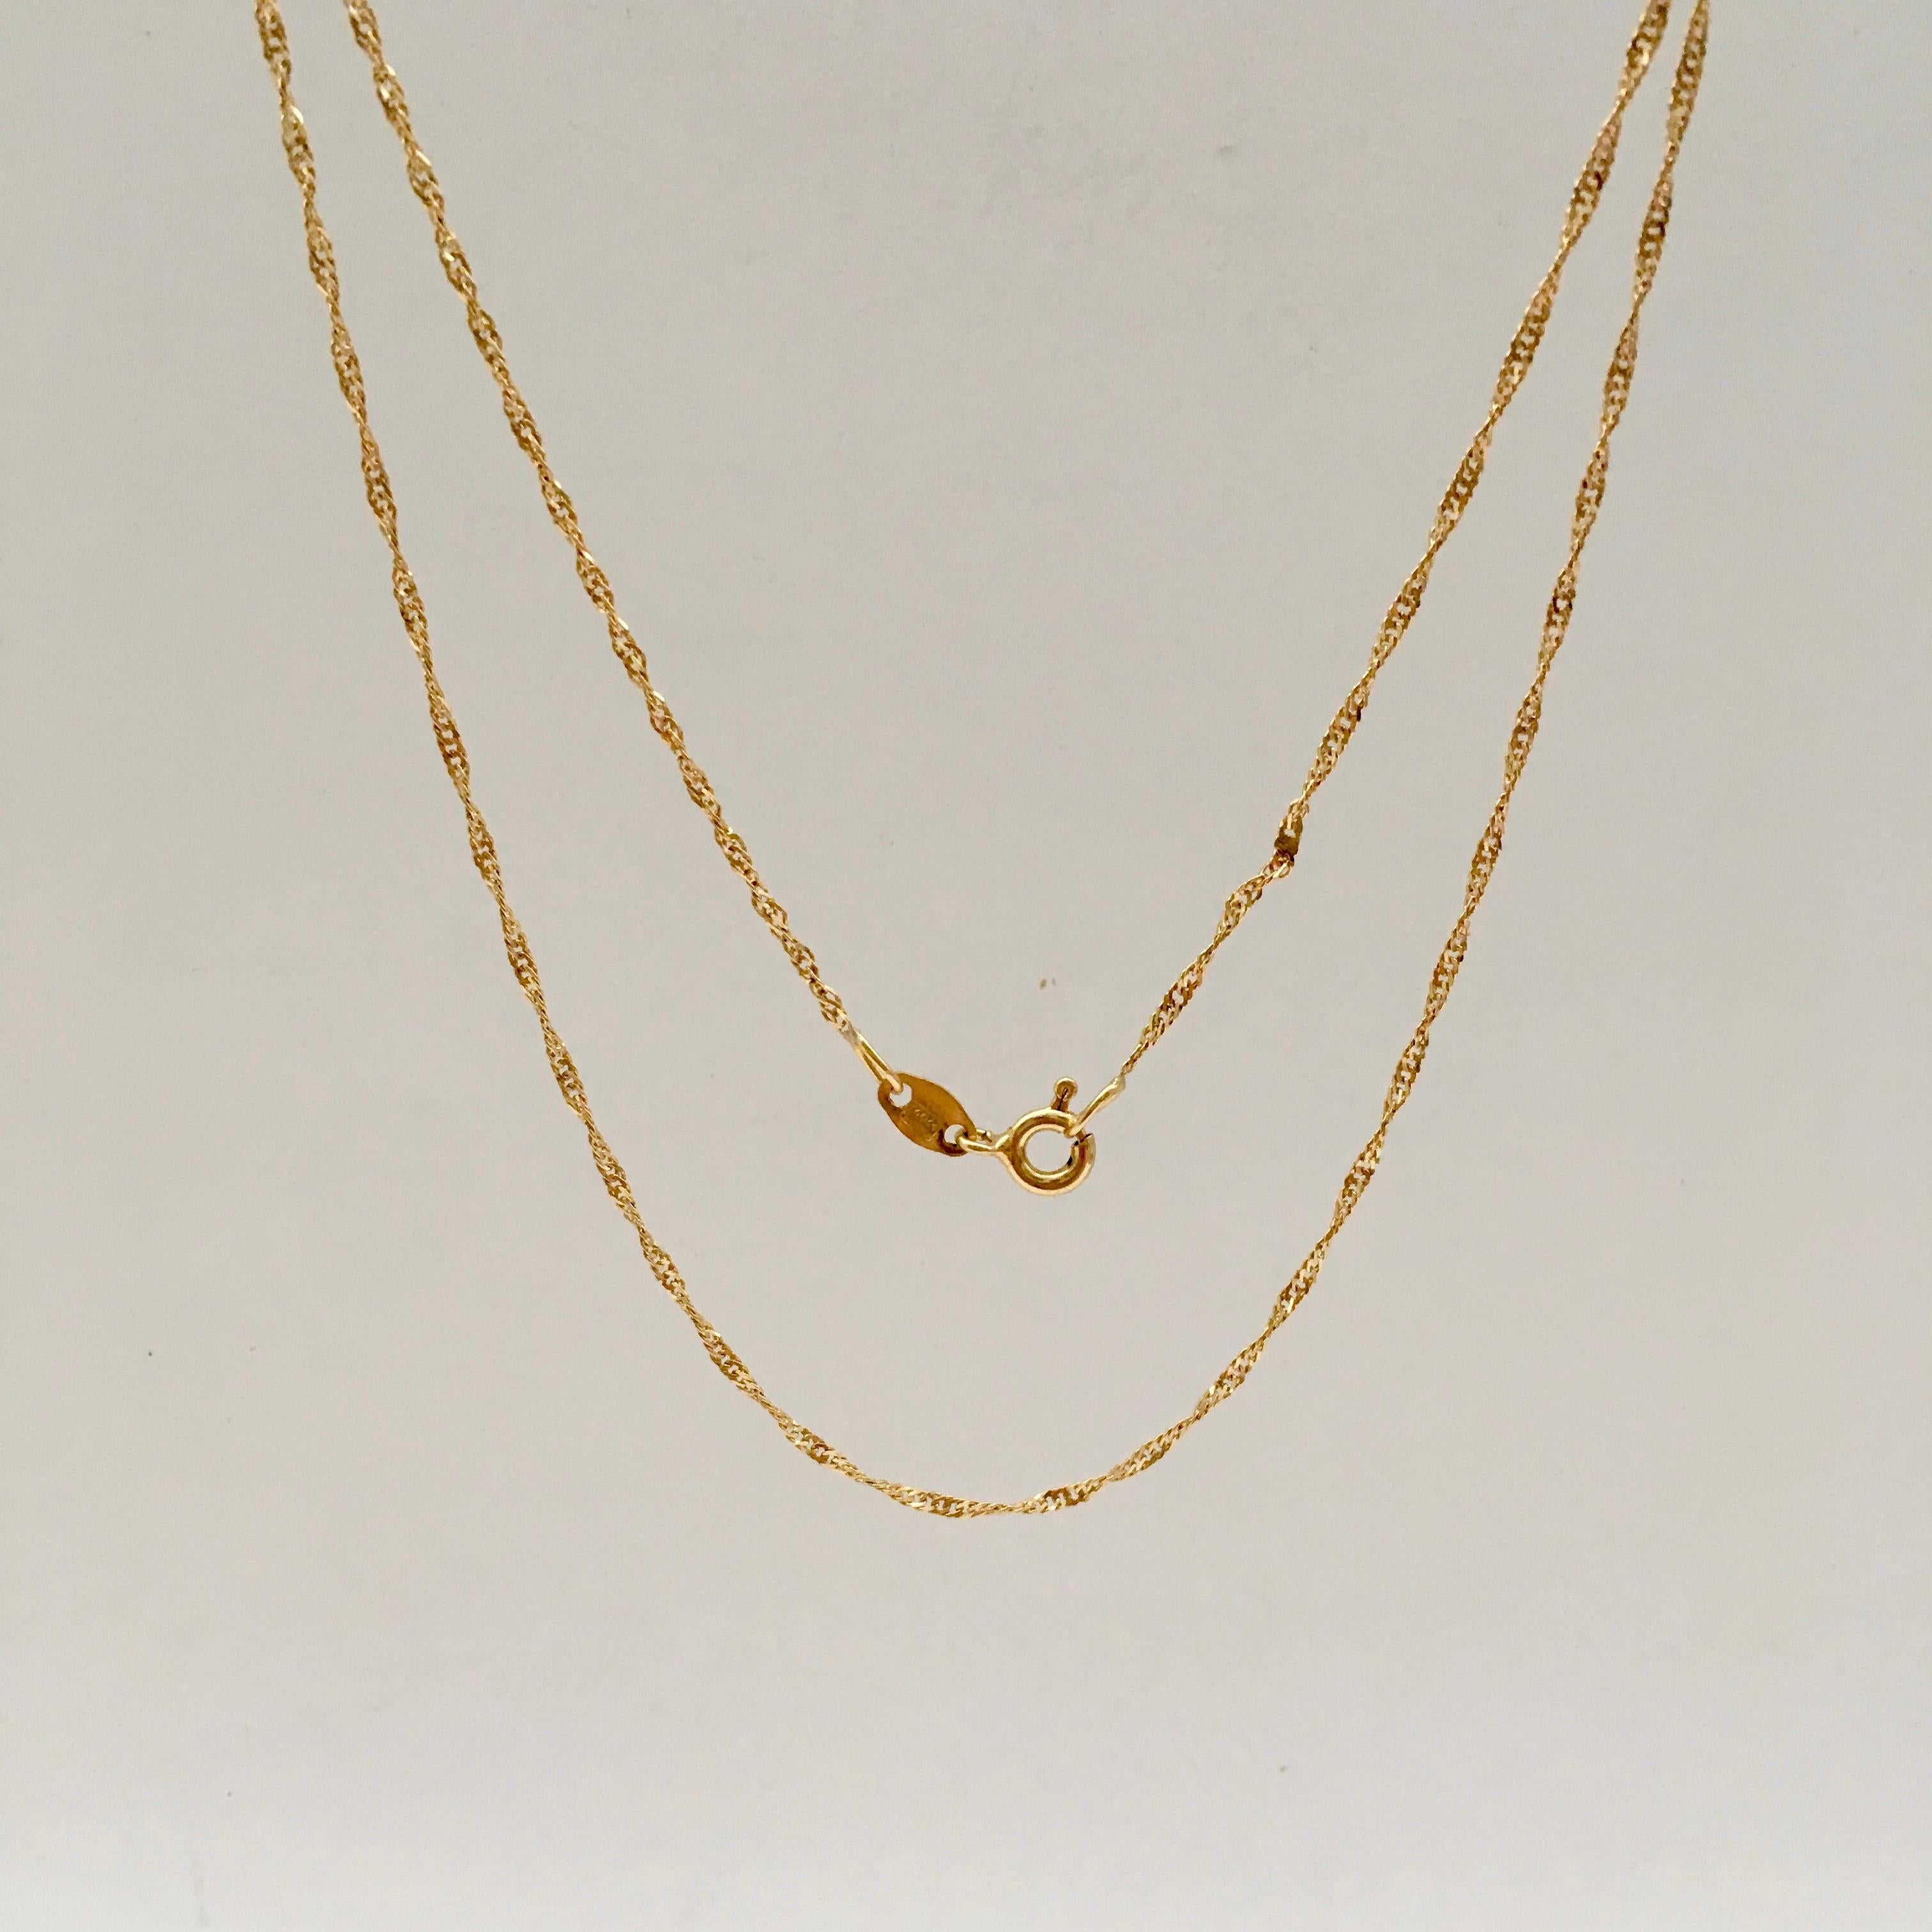 Vintage 18 Karat Gold Chain Bright Yellow Gold Fine Twisted Necklace 2